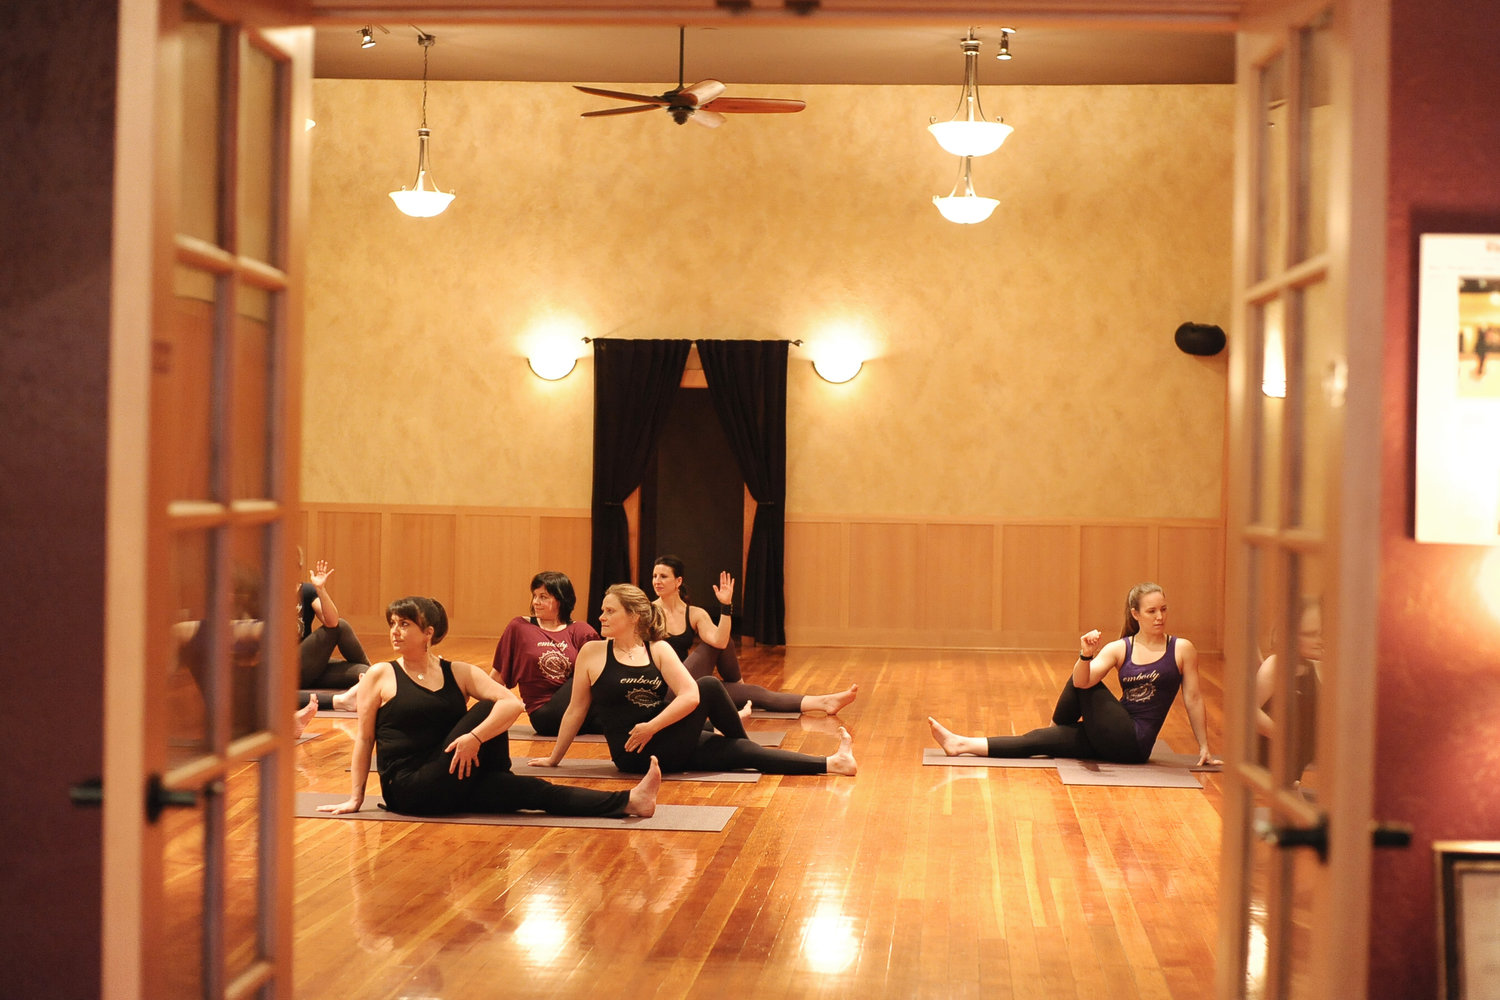 Embody Movement Studio members are seen on mats in this courtesy photo.